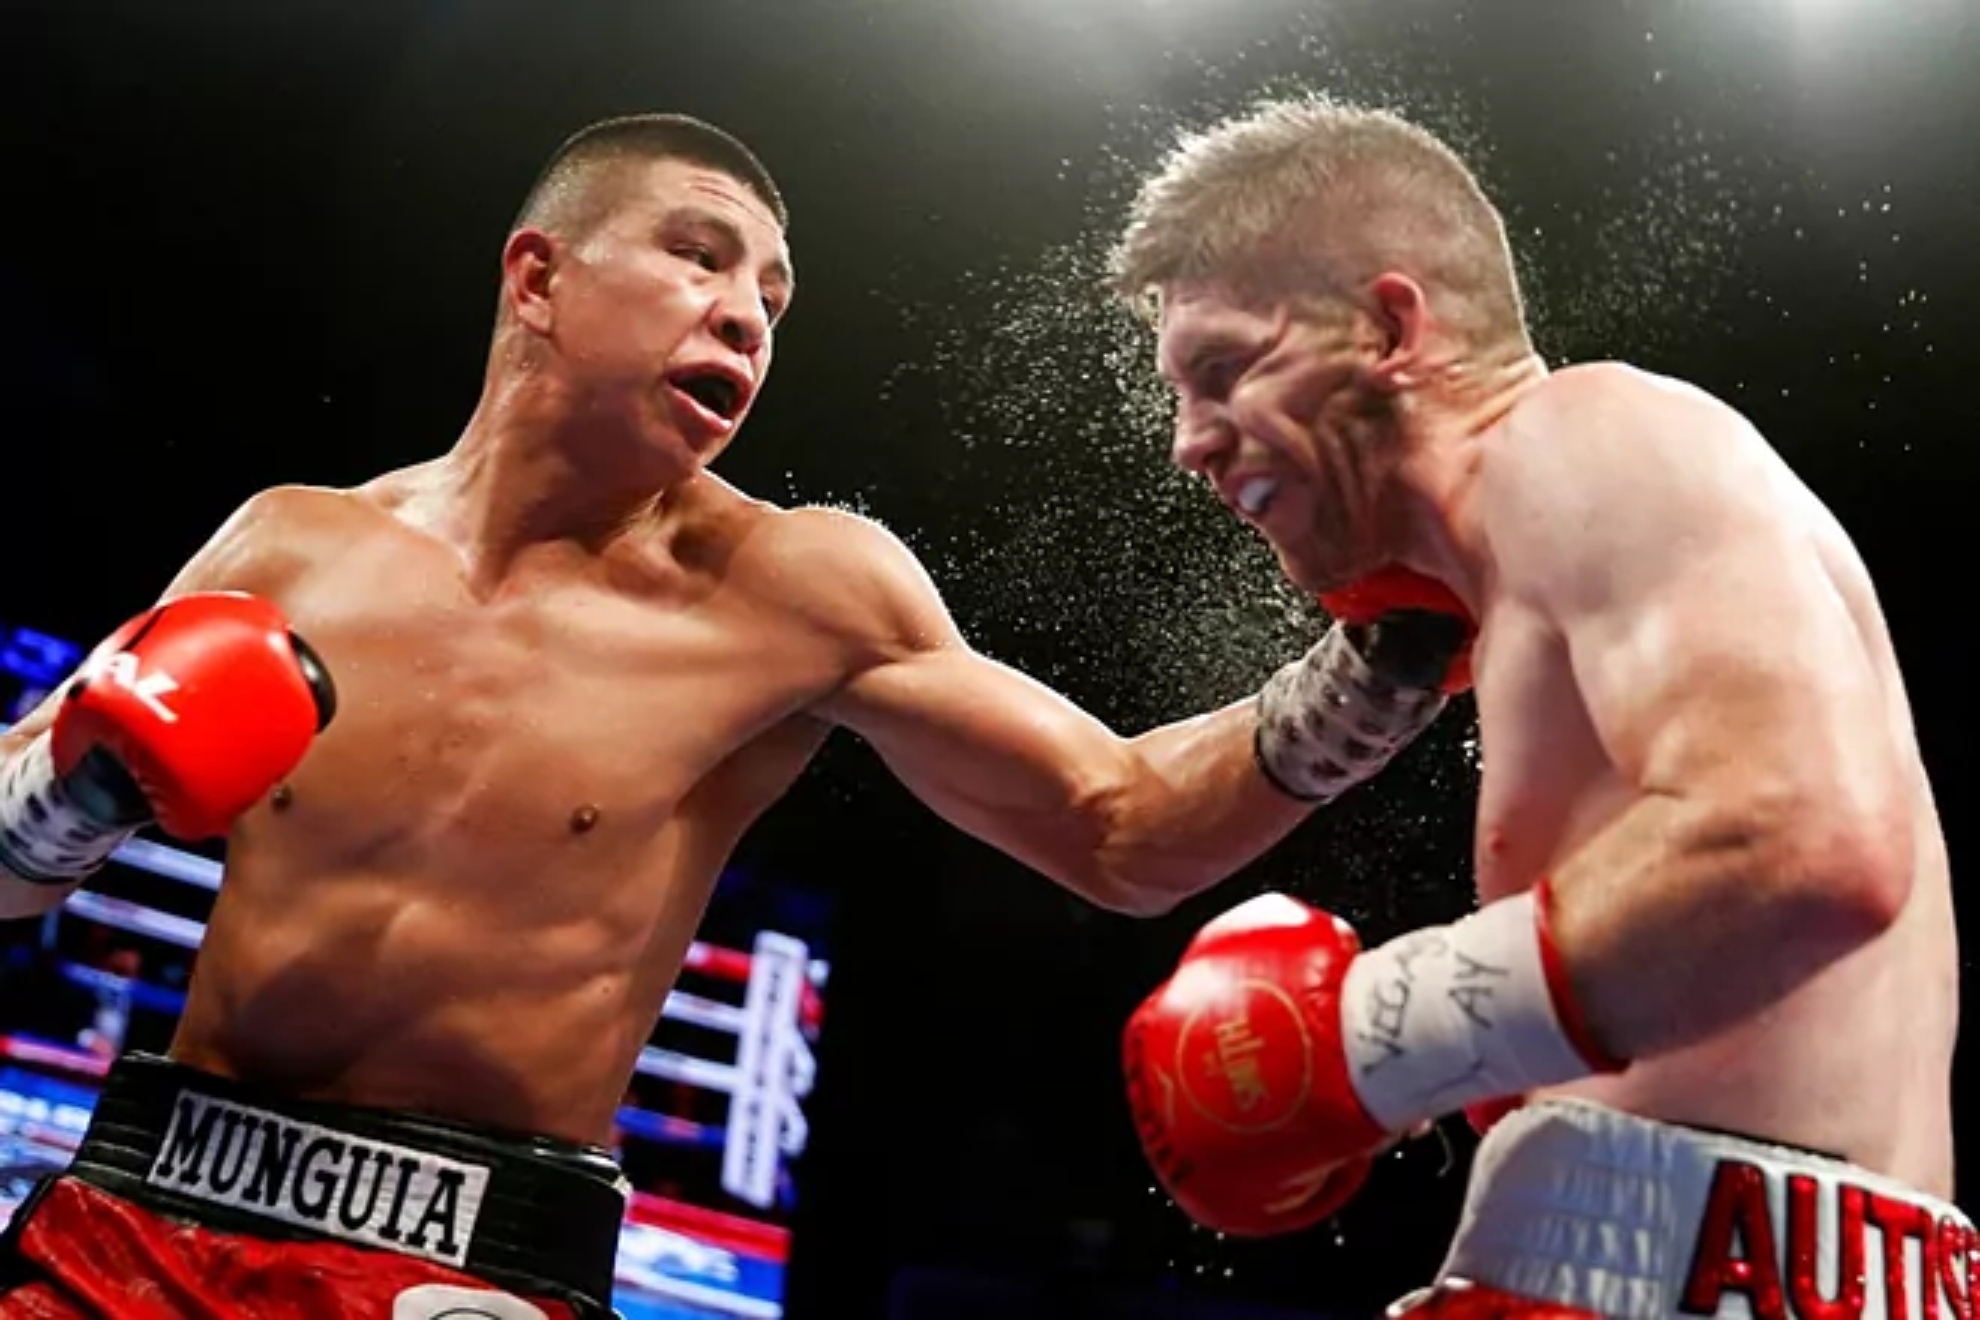 Jaime Munguia claims he is not impressed by the biggest purse of his career when fighting Canelo